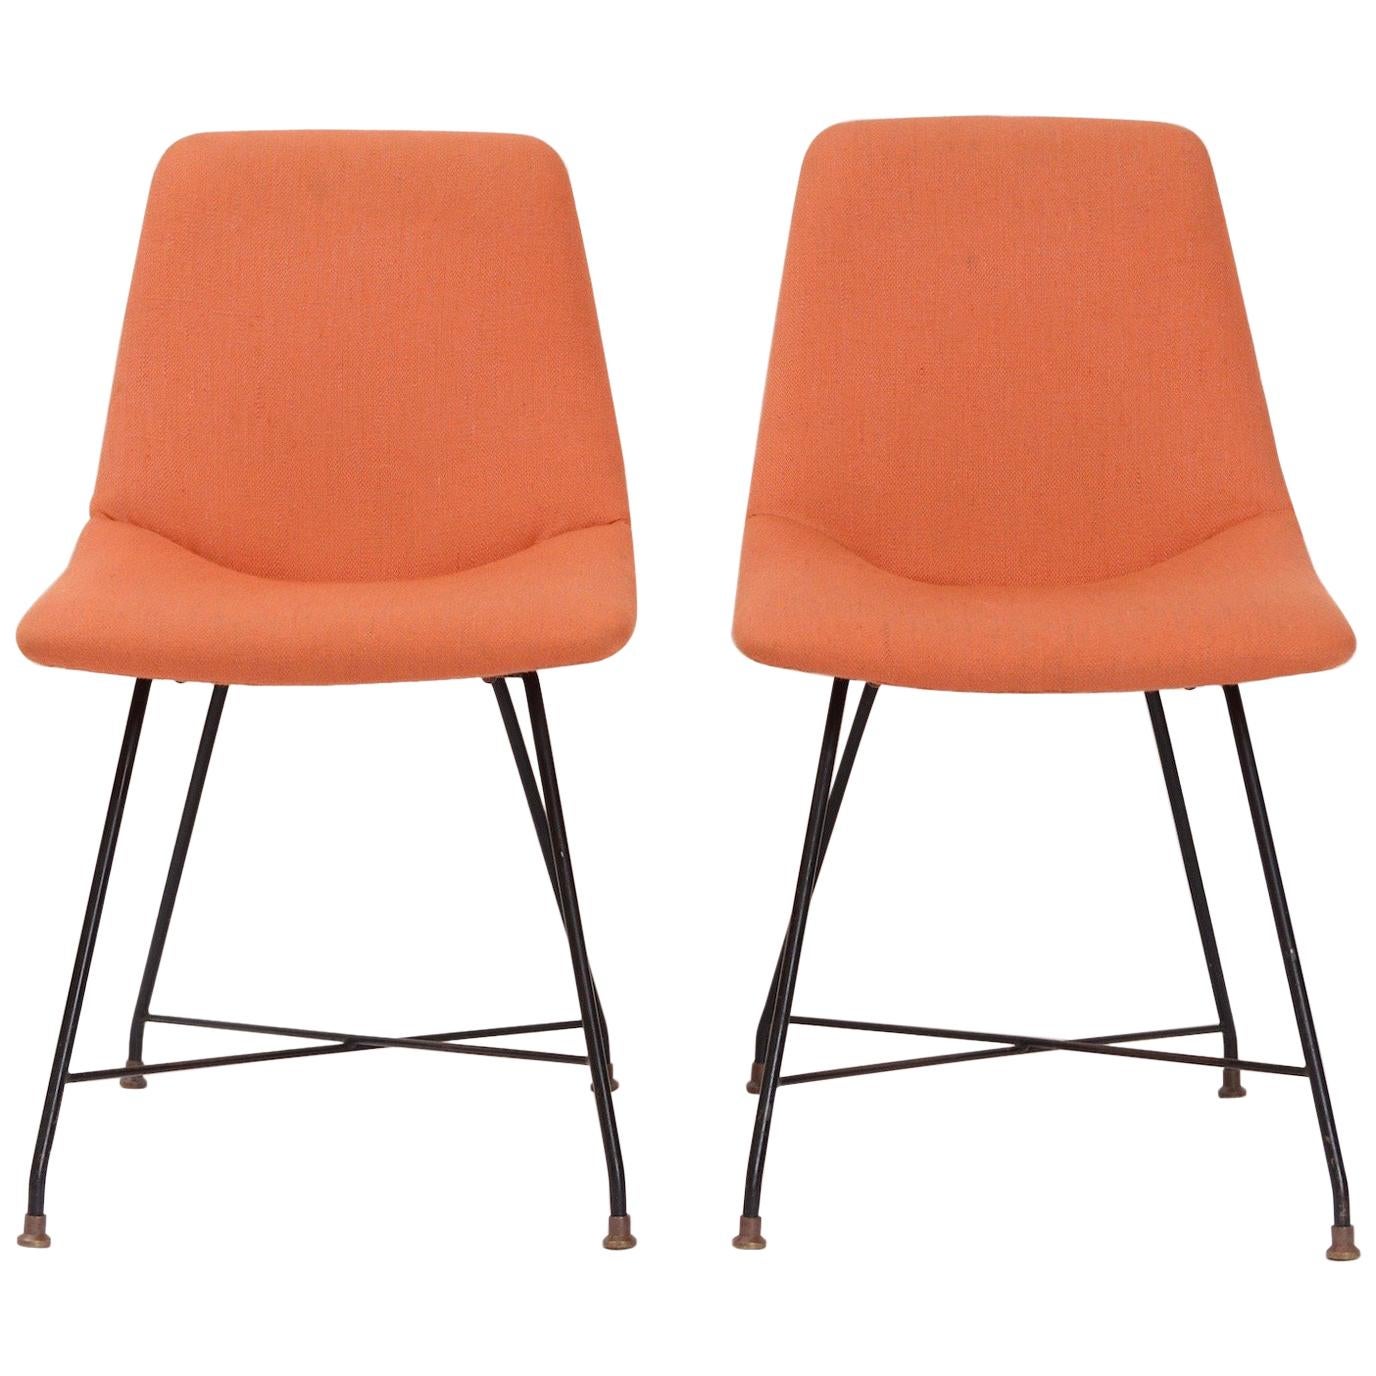 Pair of ‘Aster’ Chairs by Augusto Bozzi, Italy, circa 1956